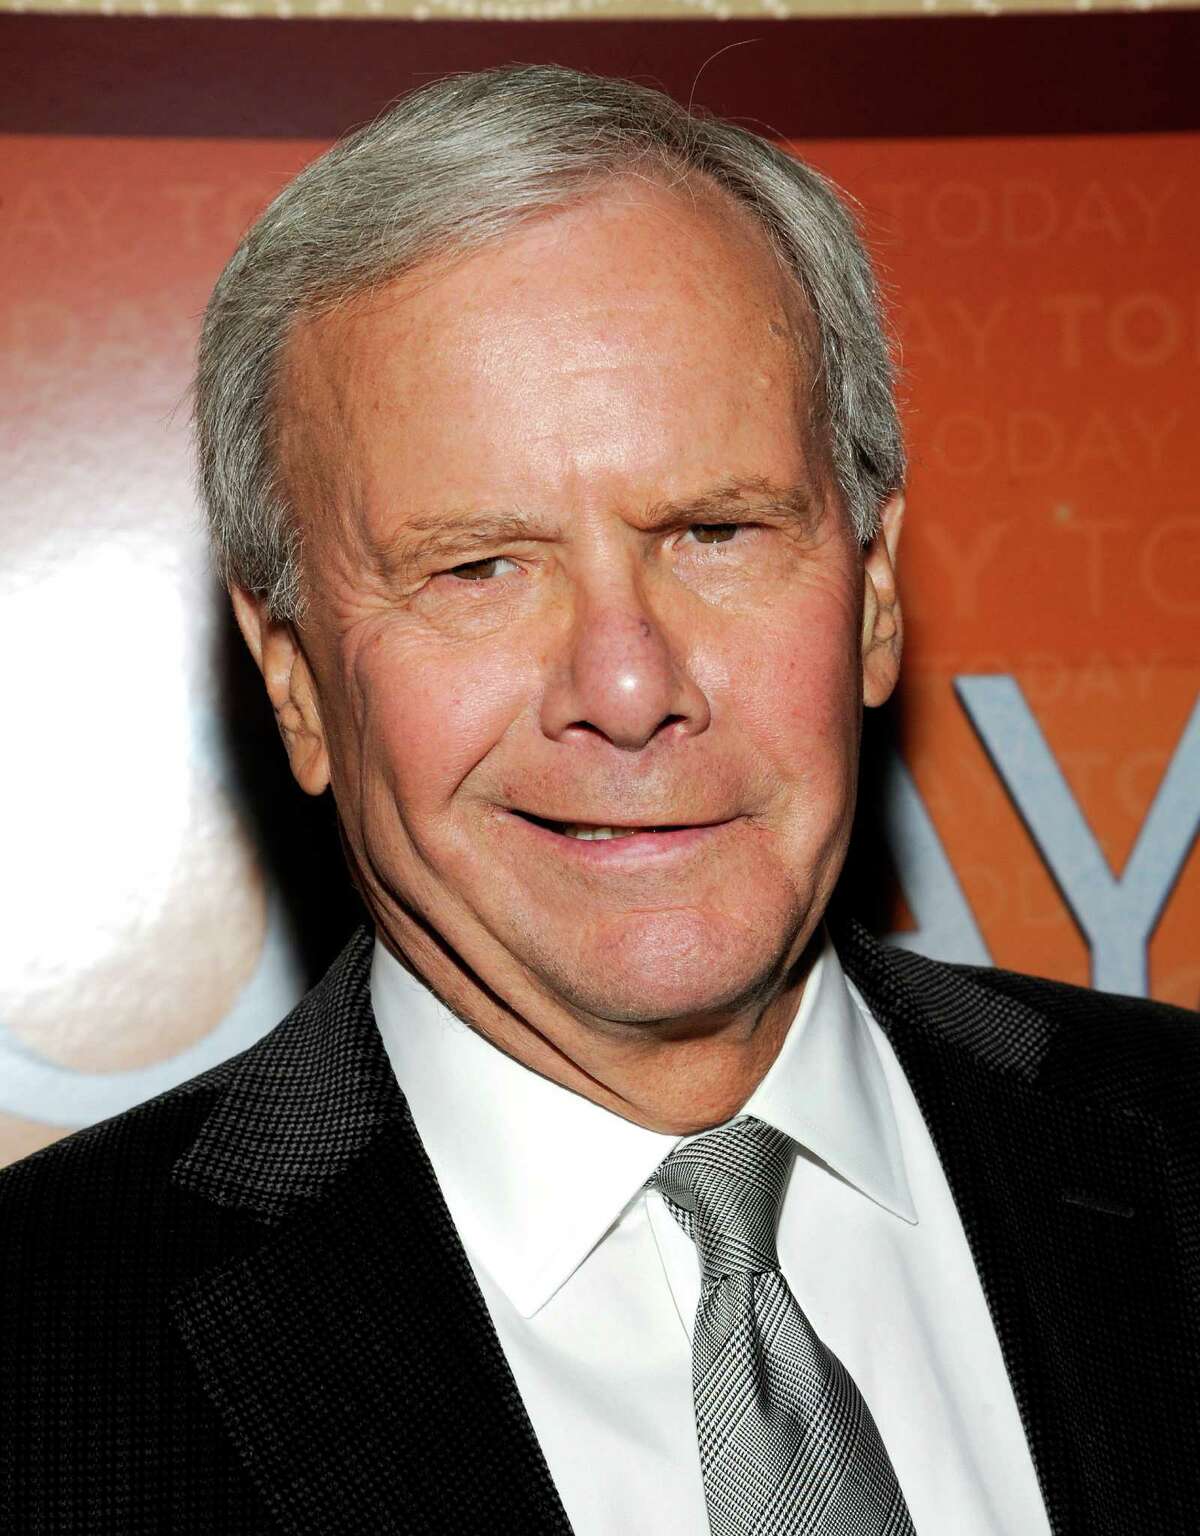 FILE - This Jan. 12, 2012 file photo shows NBC News special correspondent and former "Today" show host Tom Brokaw attending the "Today" show 60th anniversary celebration at the Edison Ballroom in New York. (AP Photo/Evan Agostini, file)